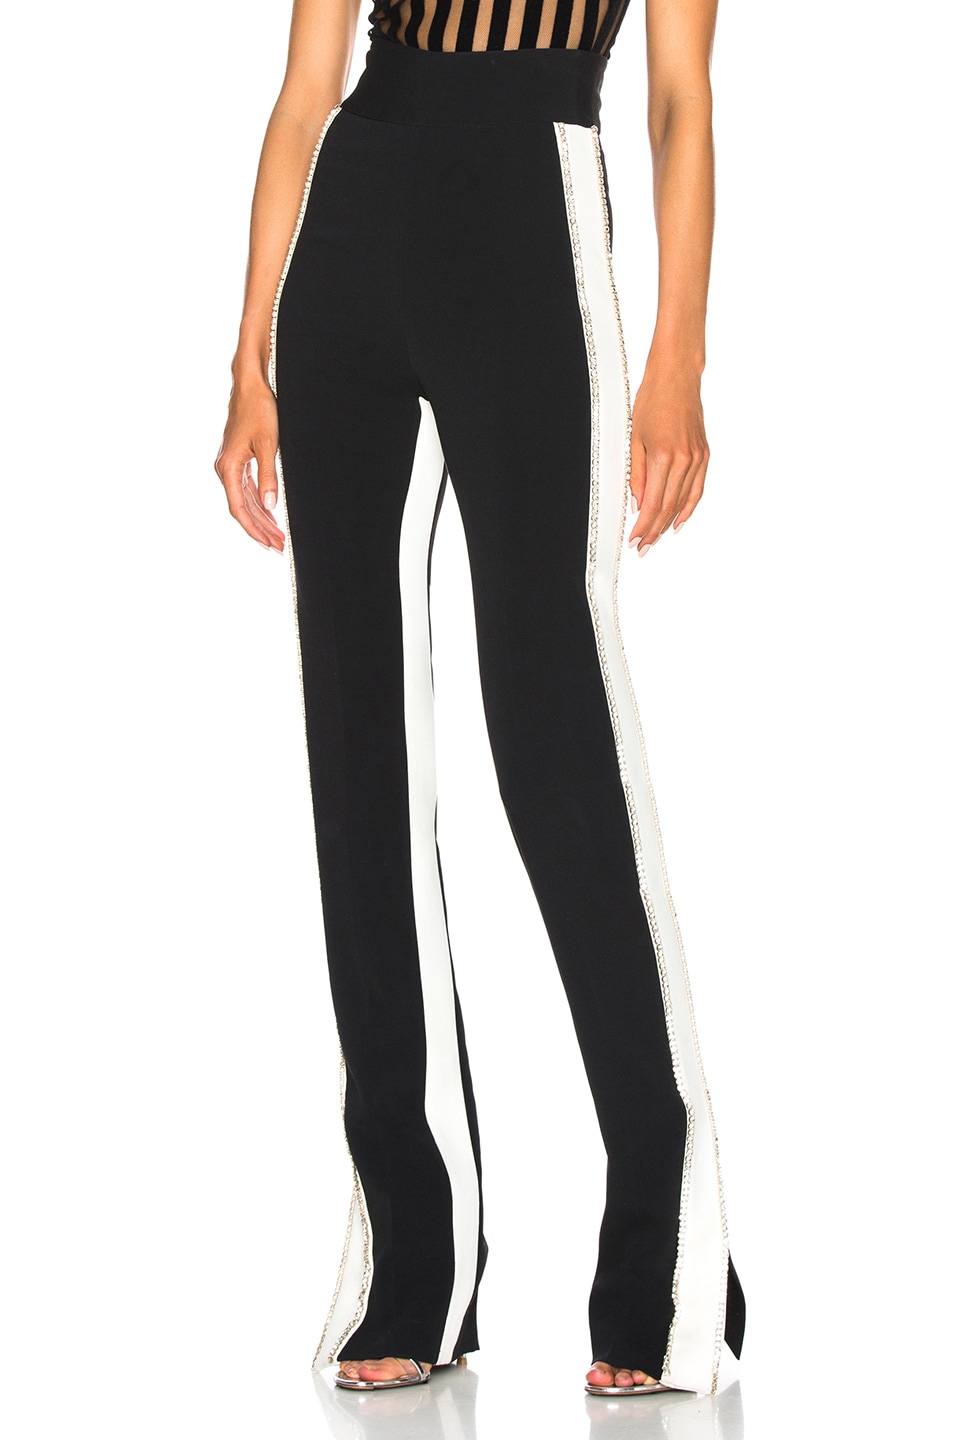 Image 1 of David Koma Side Snap Crystal Trouser Pants in Black, White & Silver